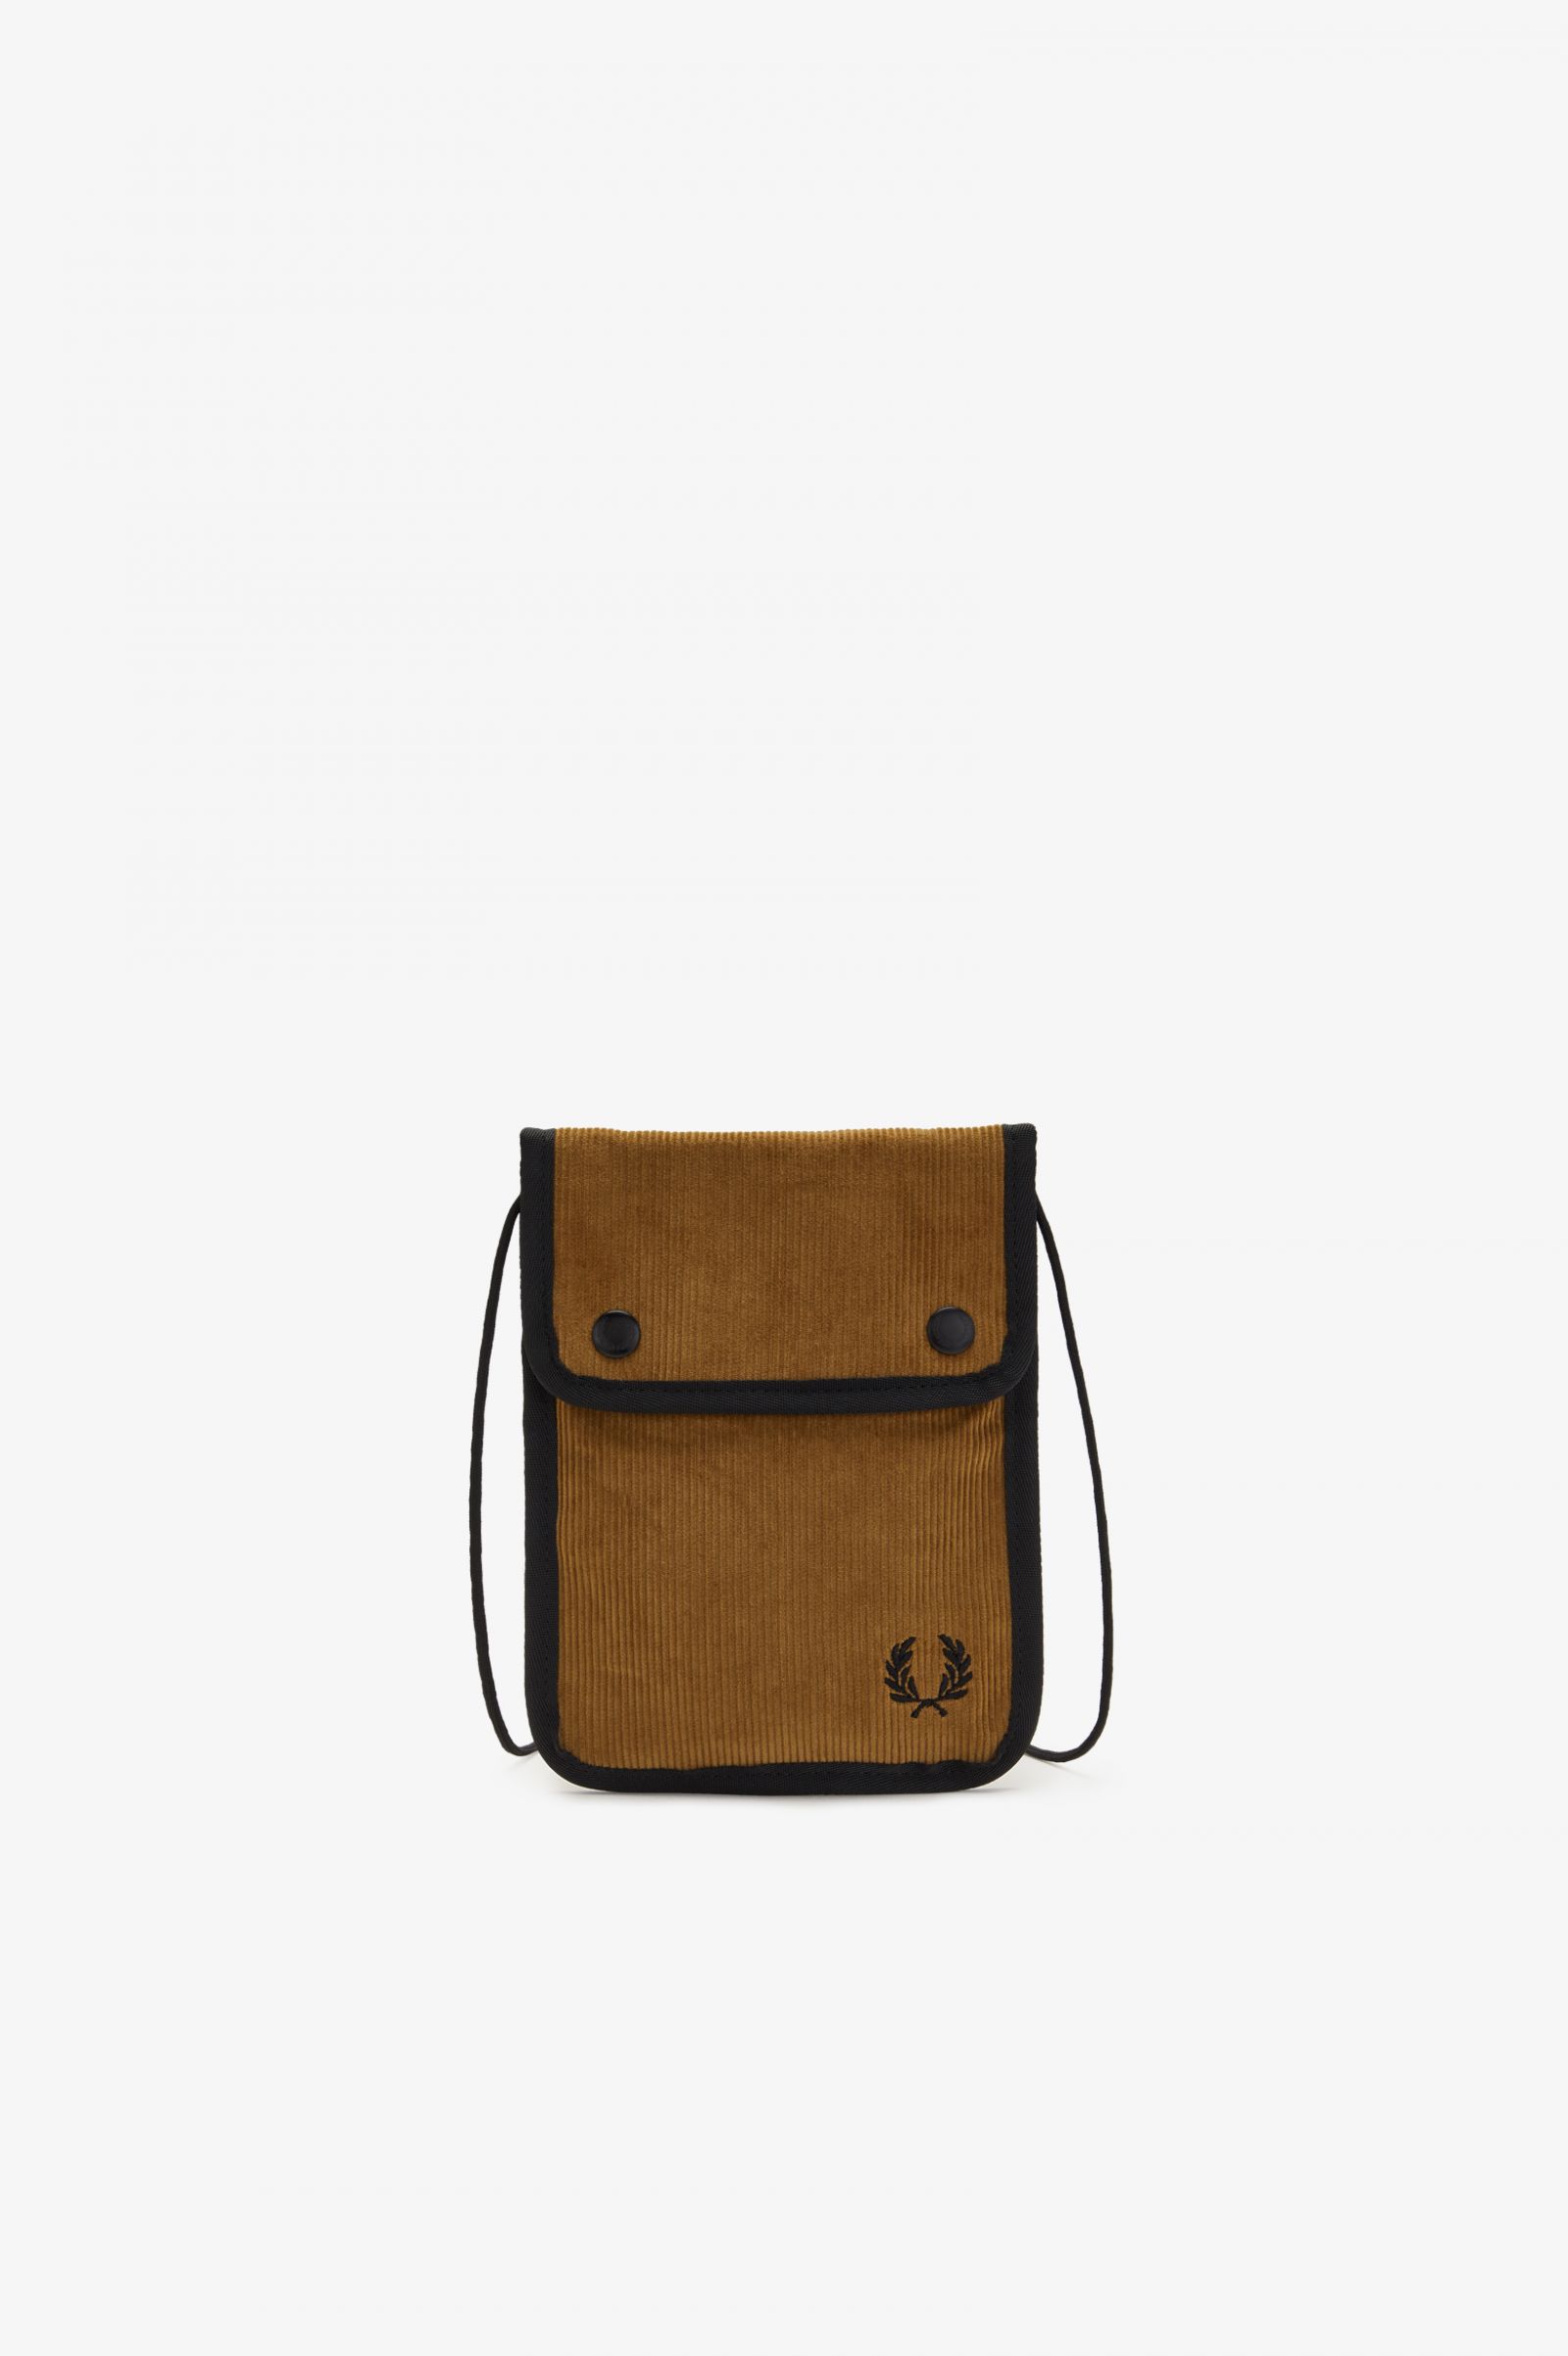 Fread Perry Branded Cord Side Bag in Caramel